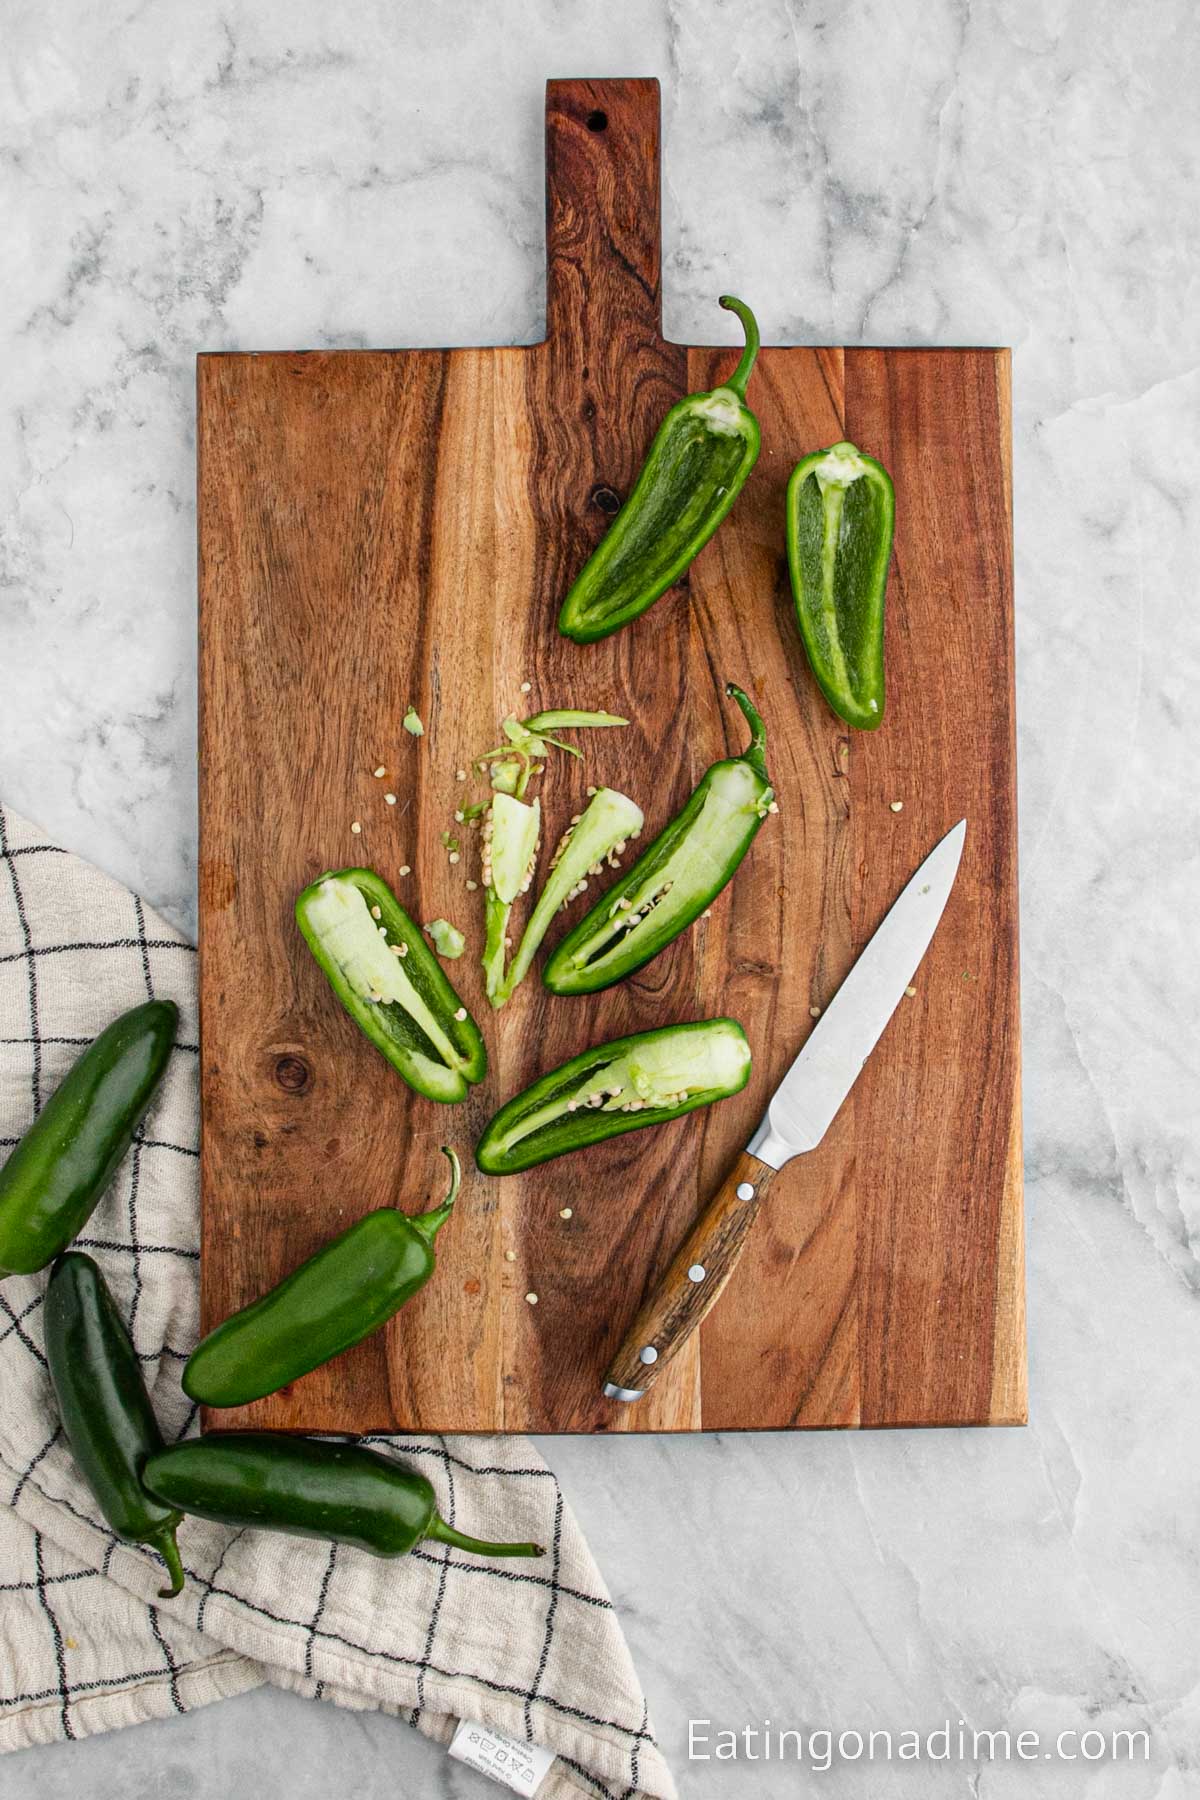 Slicing the jalapeno peppers on a cutting board with a knife